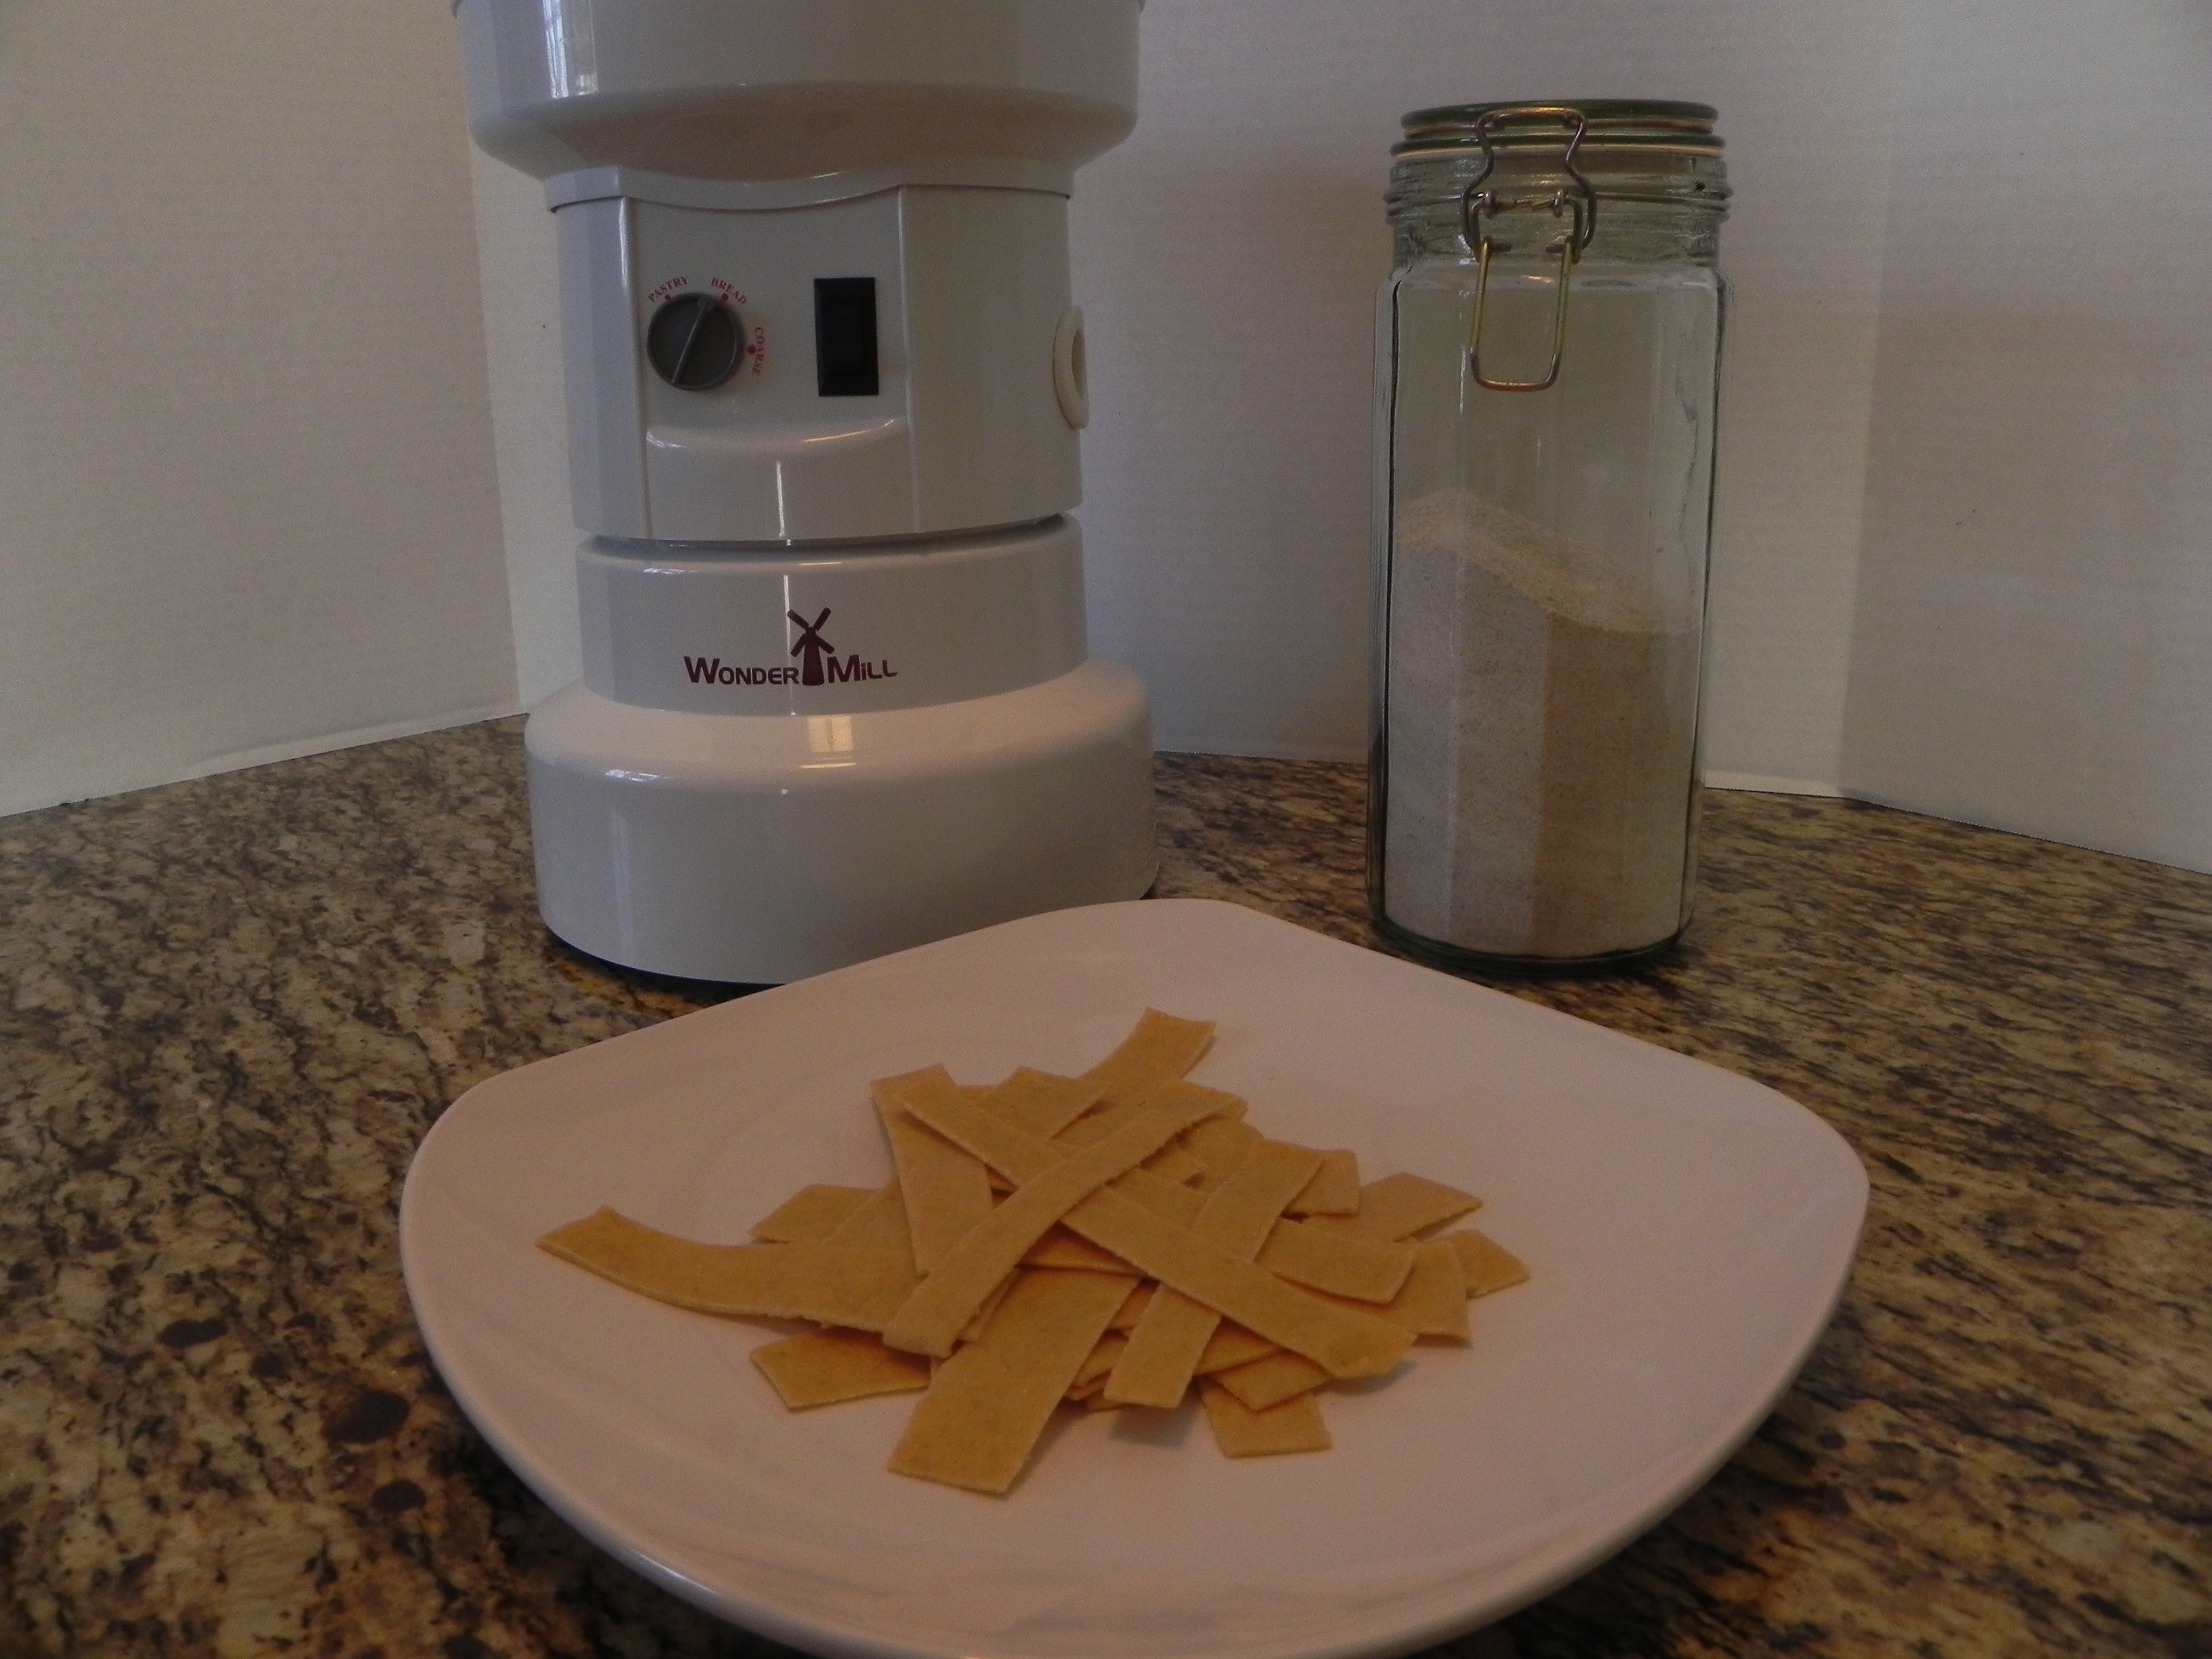 Light Wheat Pasta with The Wonder Mill